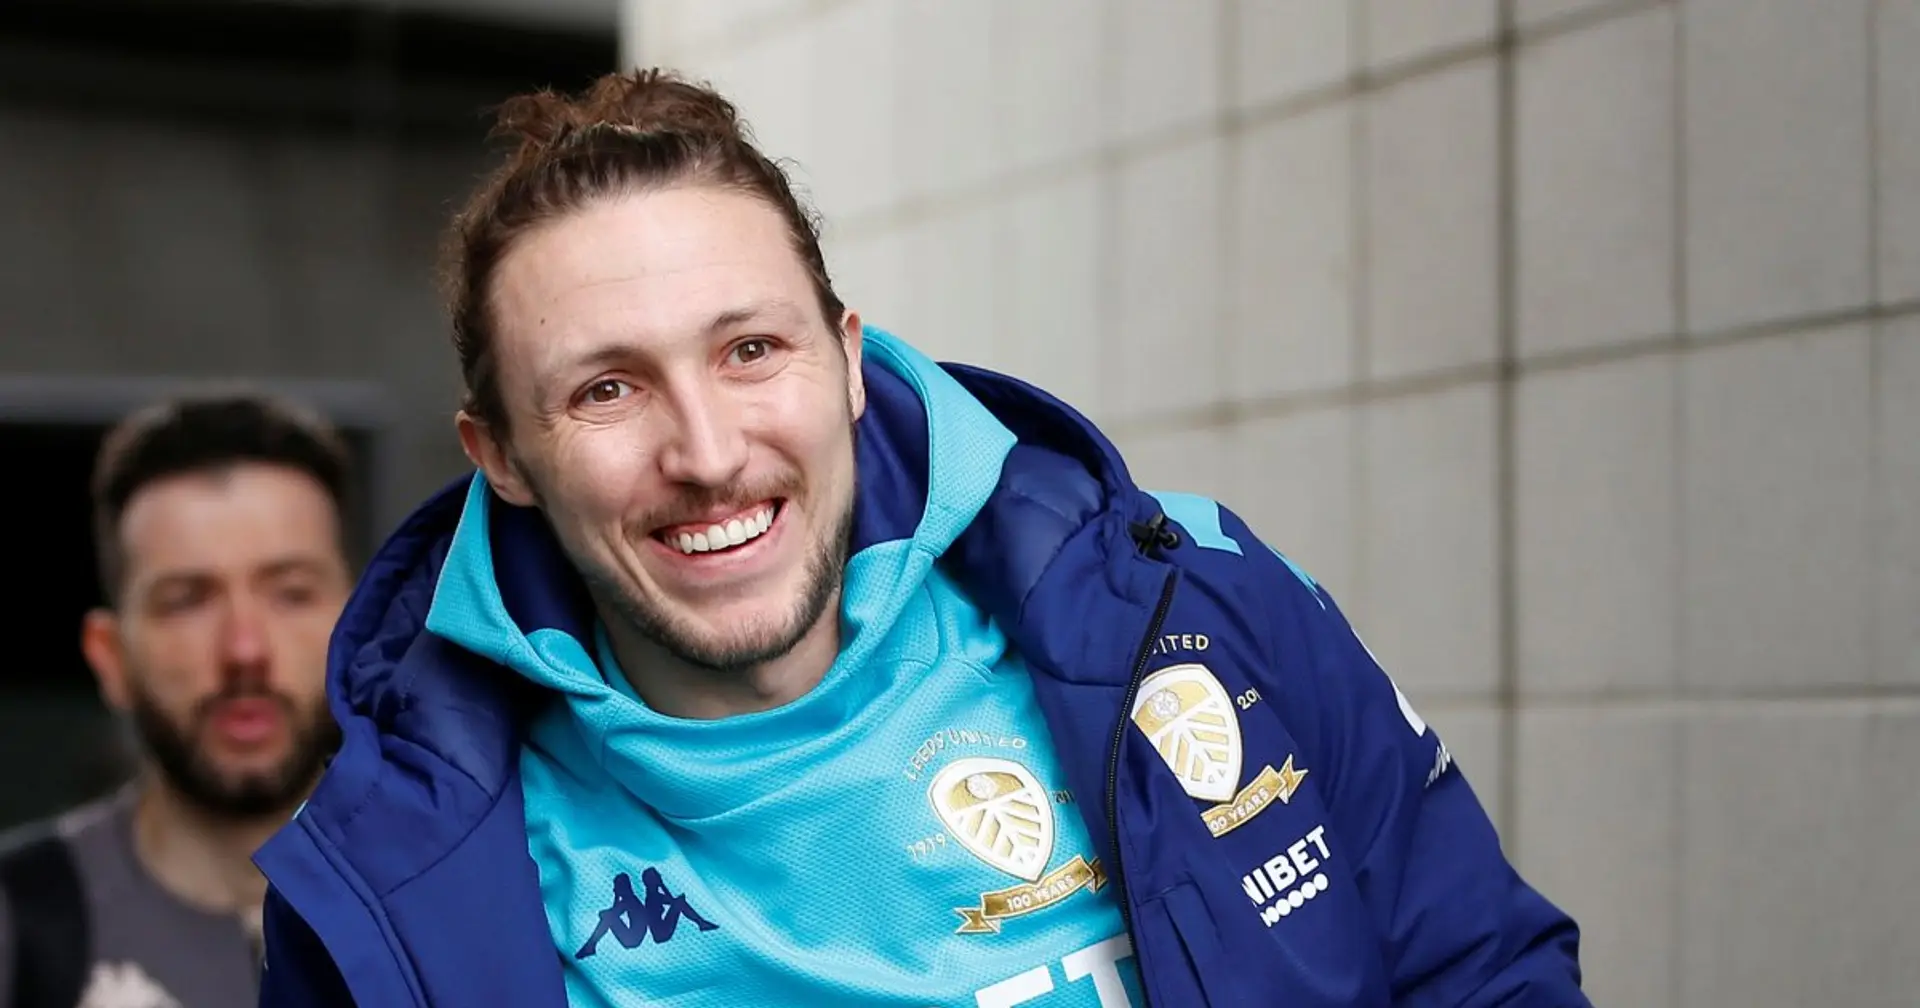 'It was great schooling': Leeds defender Ayling thanks Arsenal for developing him